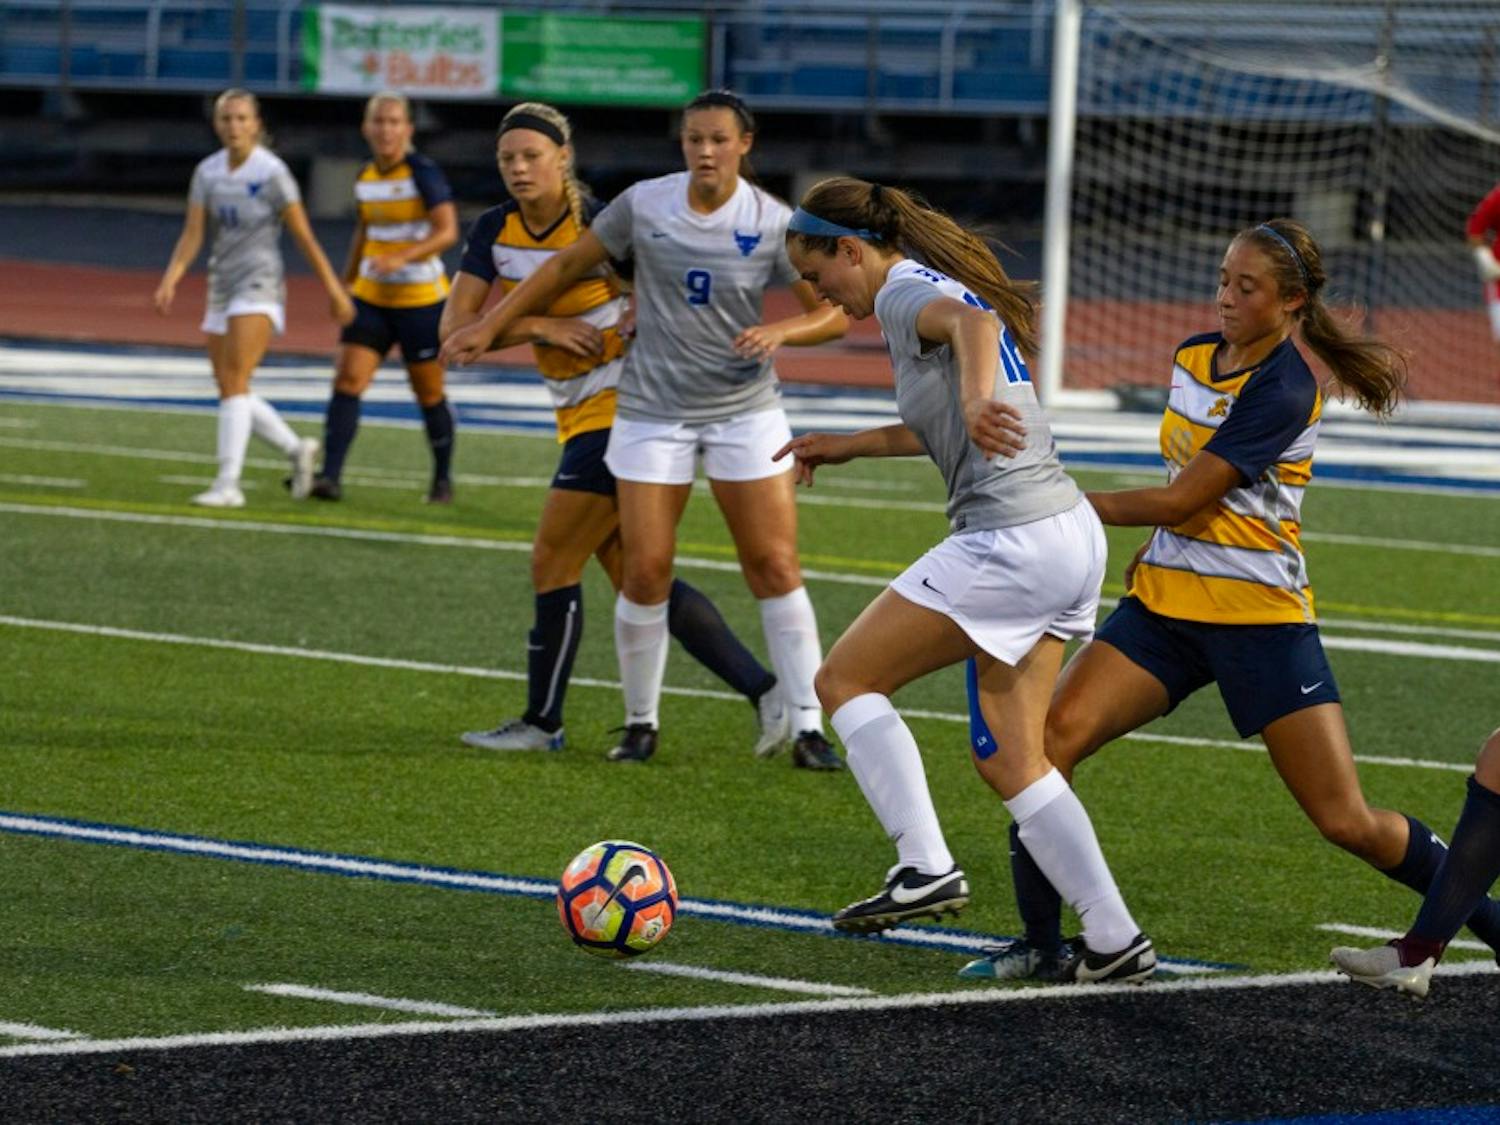 Freshman midfielder Katherine Camper dribbles the ball past a defender. The Bulls lost 4-2 to Western Michigan this past Sunday in what was a season high in goals allowed.